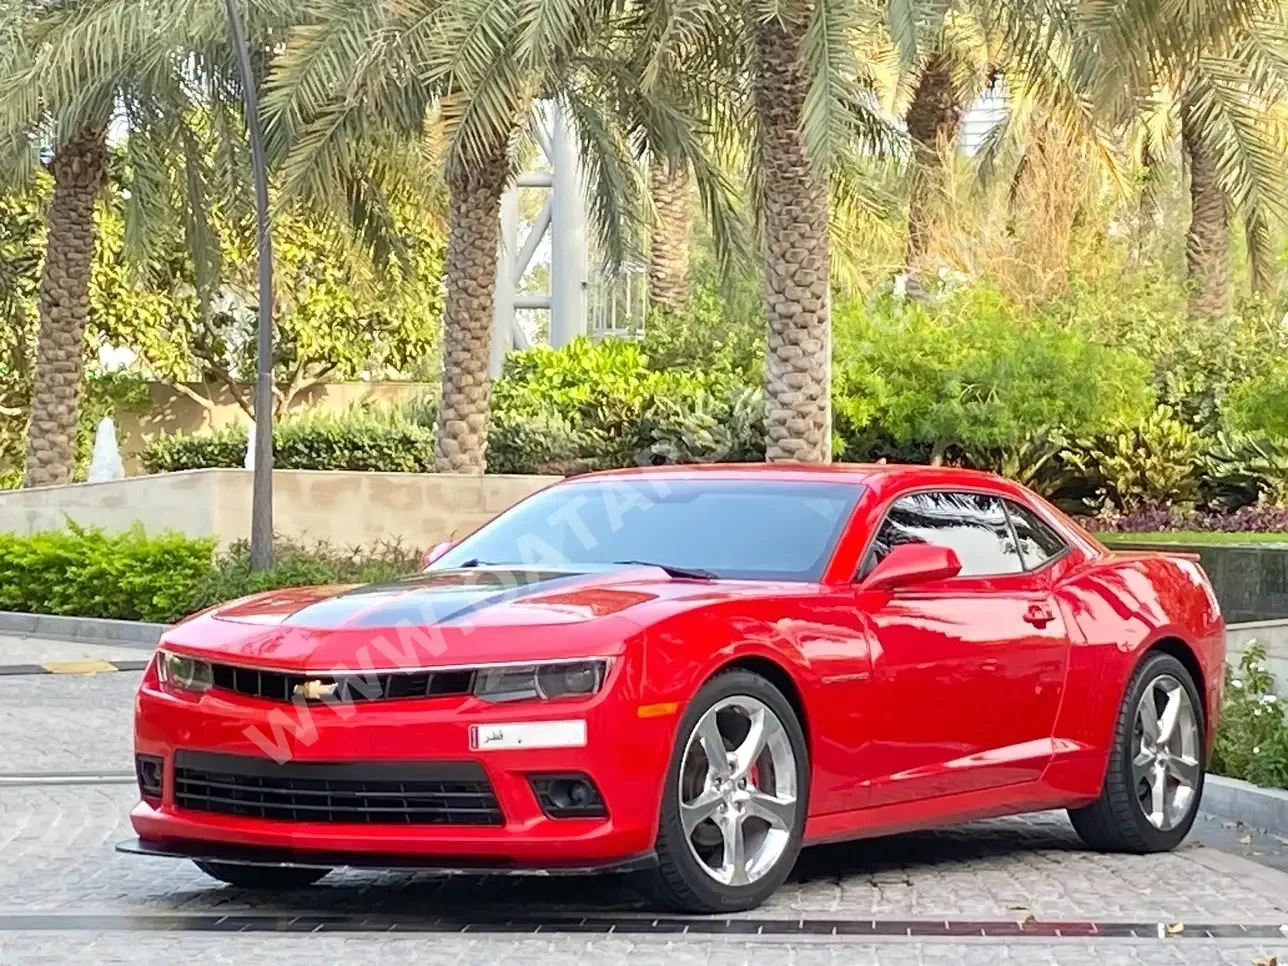 Chevrolet  Camaro  RS  2015  Automatic  88,000 Km  6 Cylinder  Rear Wheel Drive (RWD)  Coupe / Sport  Red